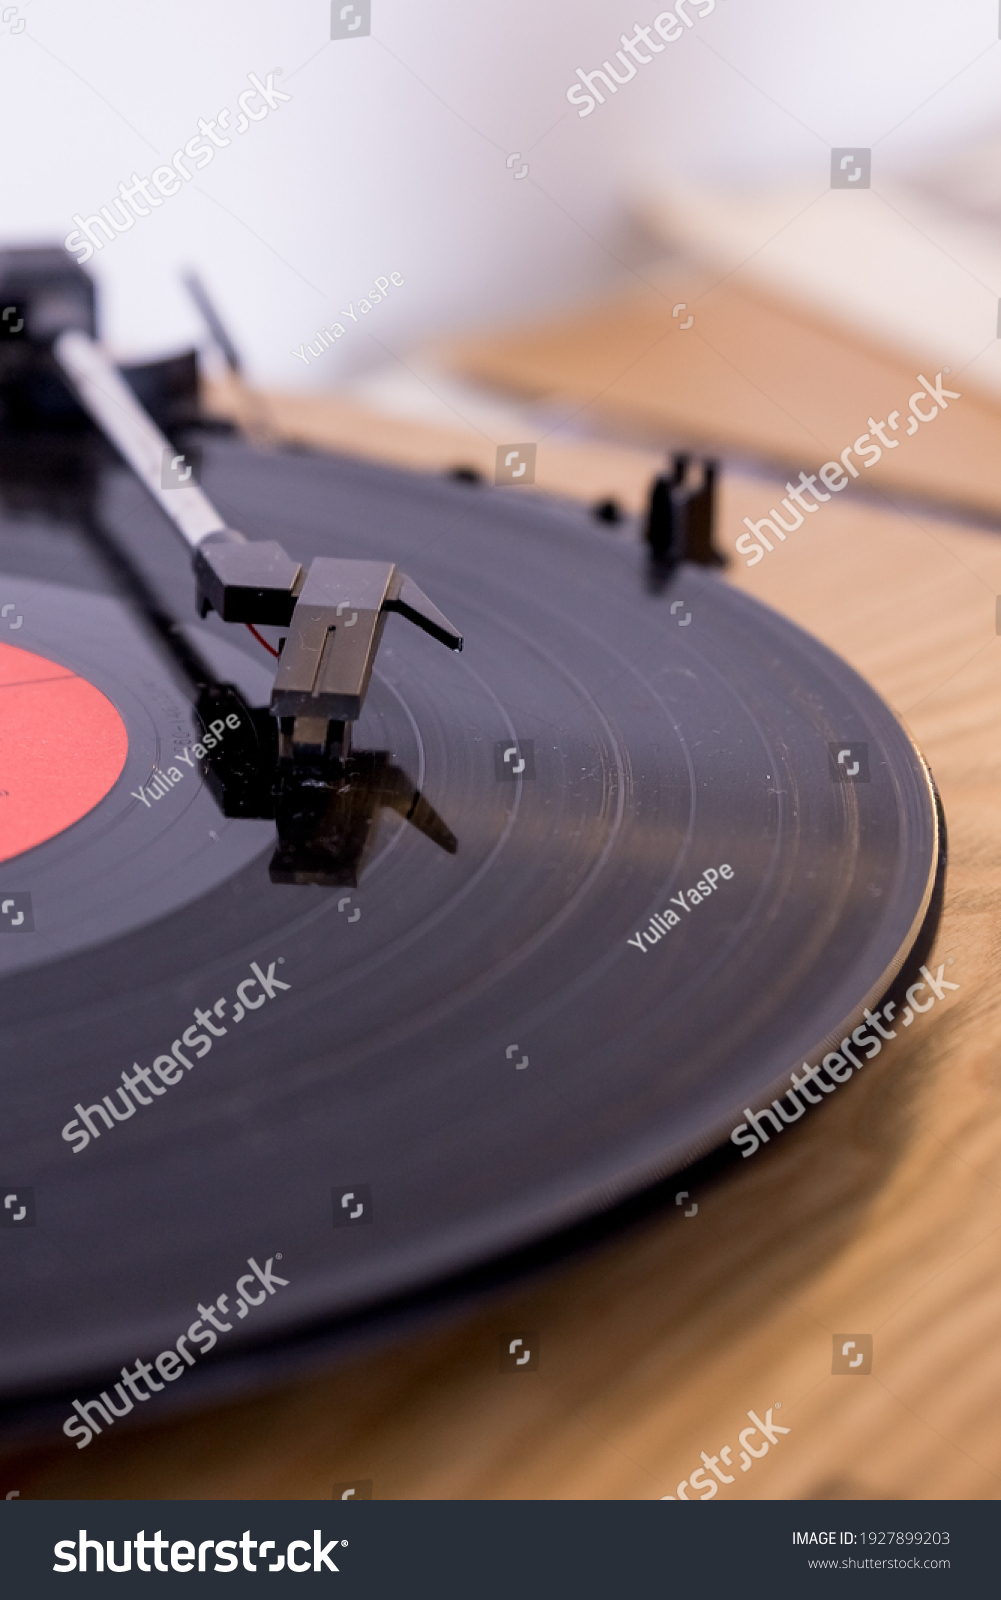 retro player with a vinyl disk on blurred background.Old gramophone turntable with disc.playing vinyl close up with needle on the record #1927899203